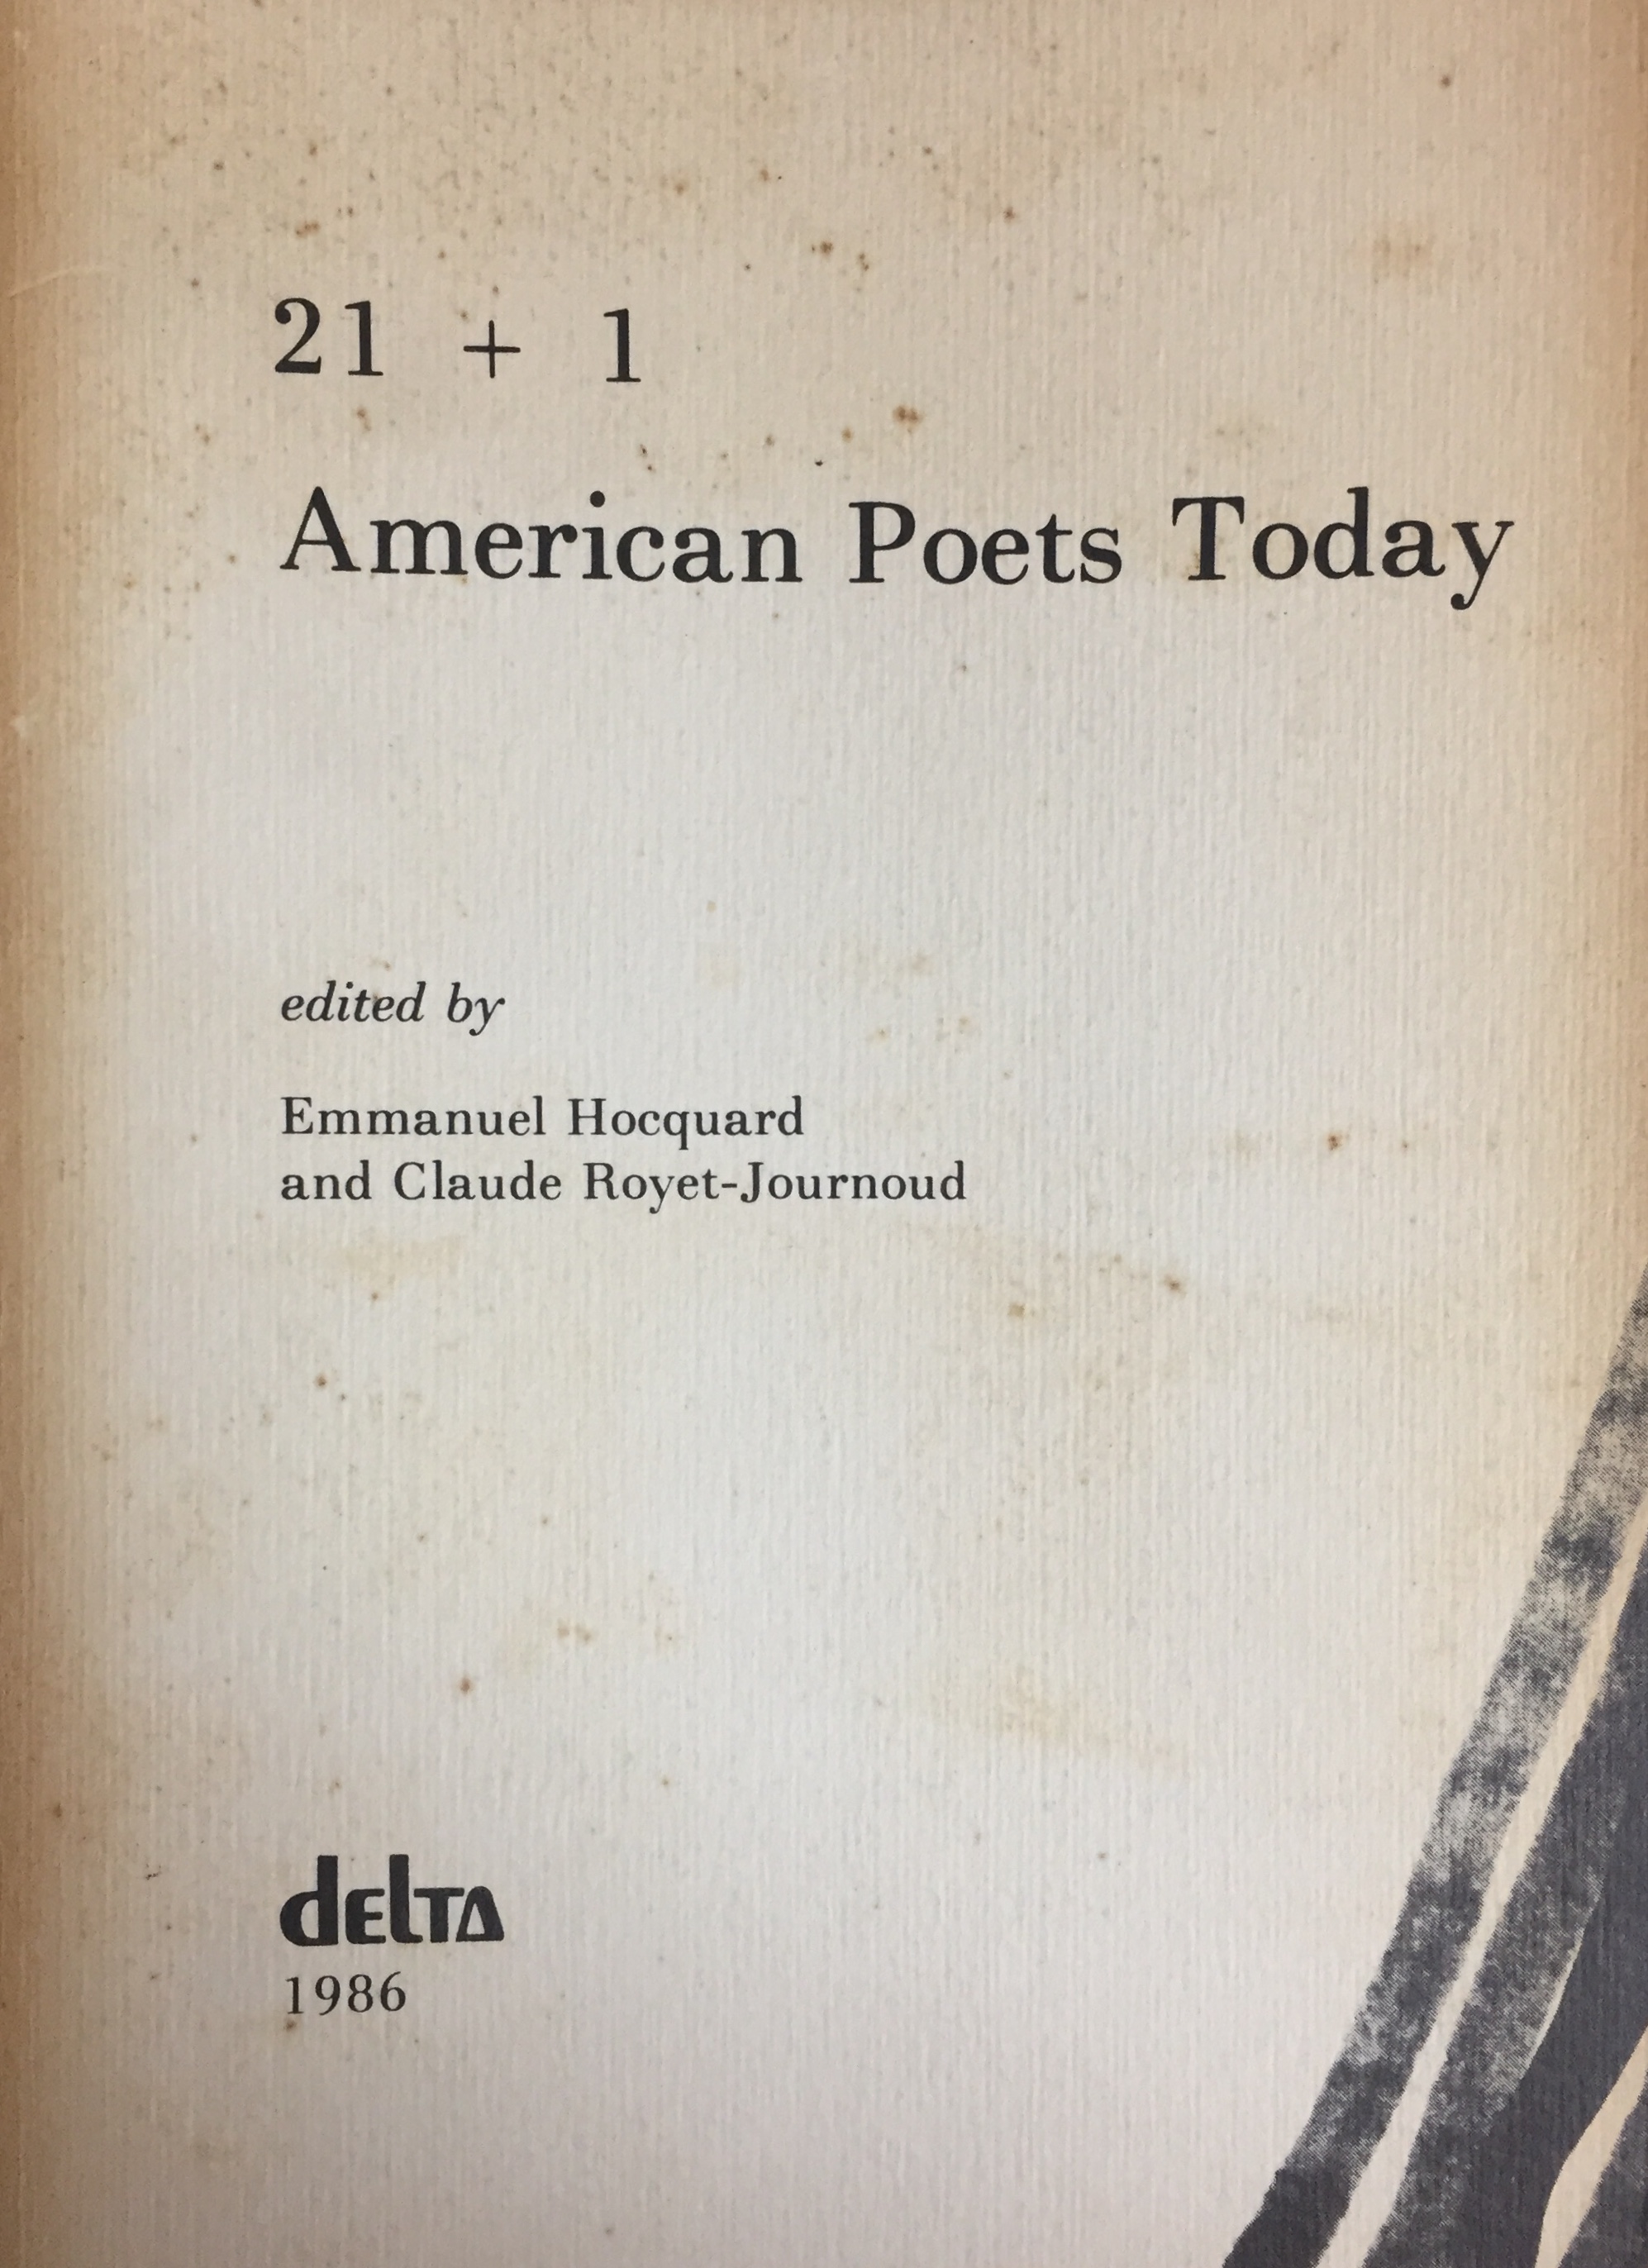 21 + 1 American Poets Today